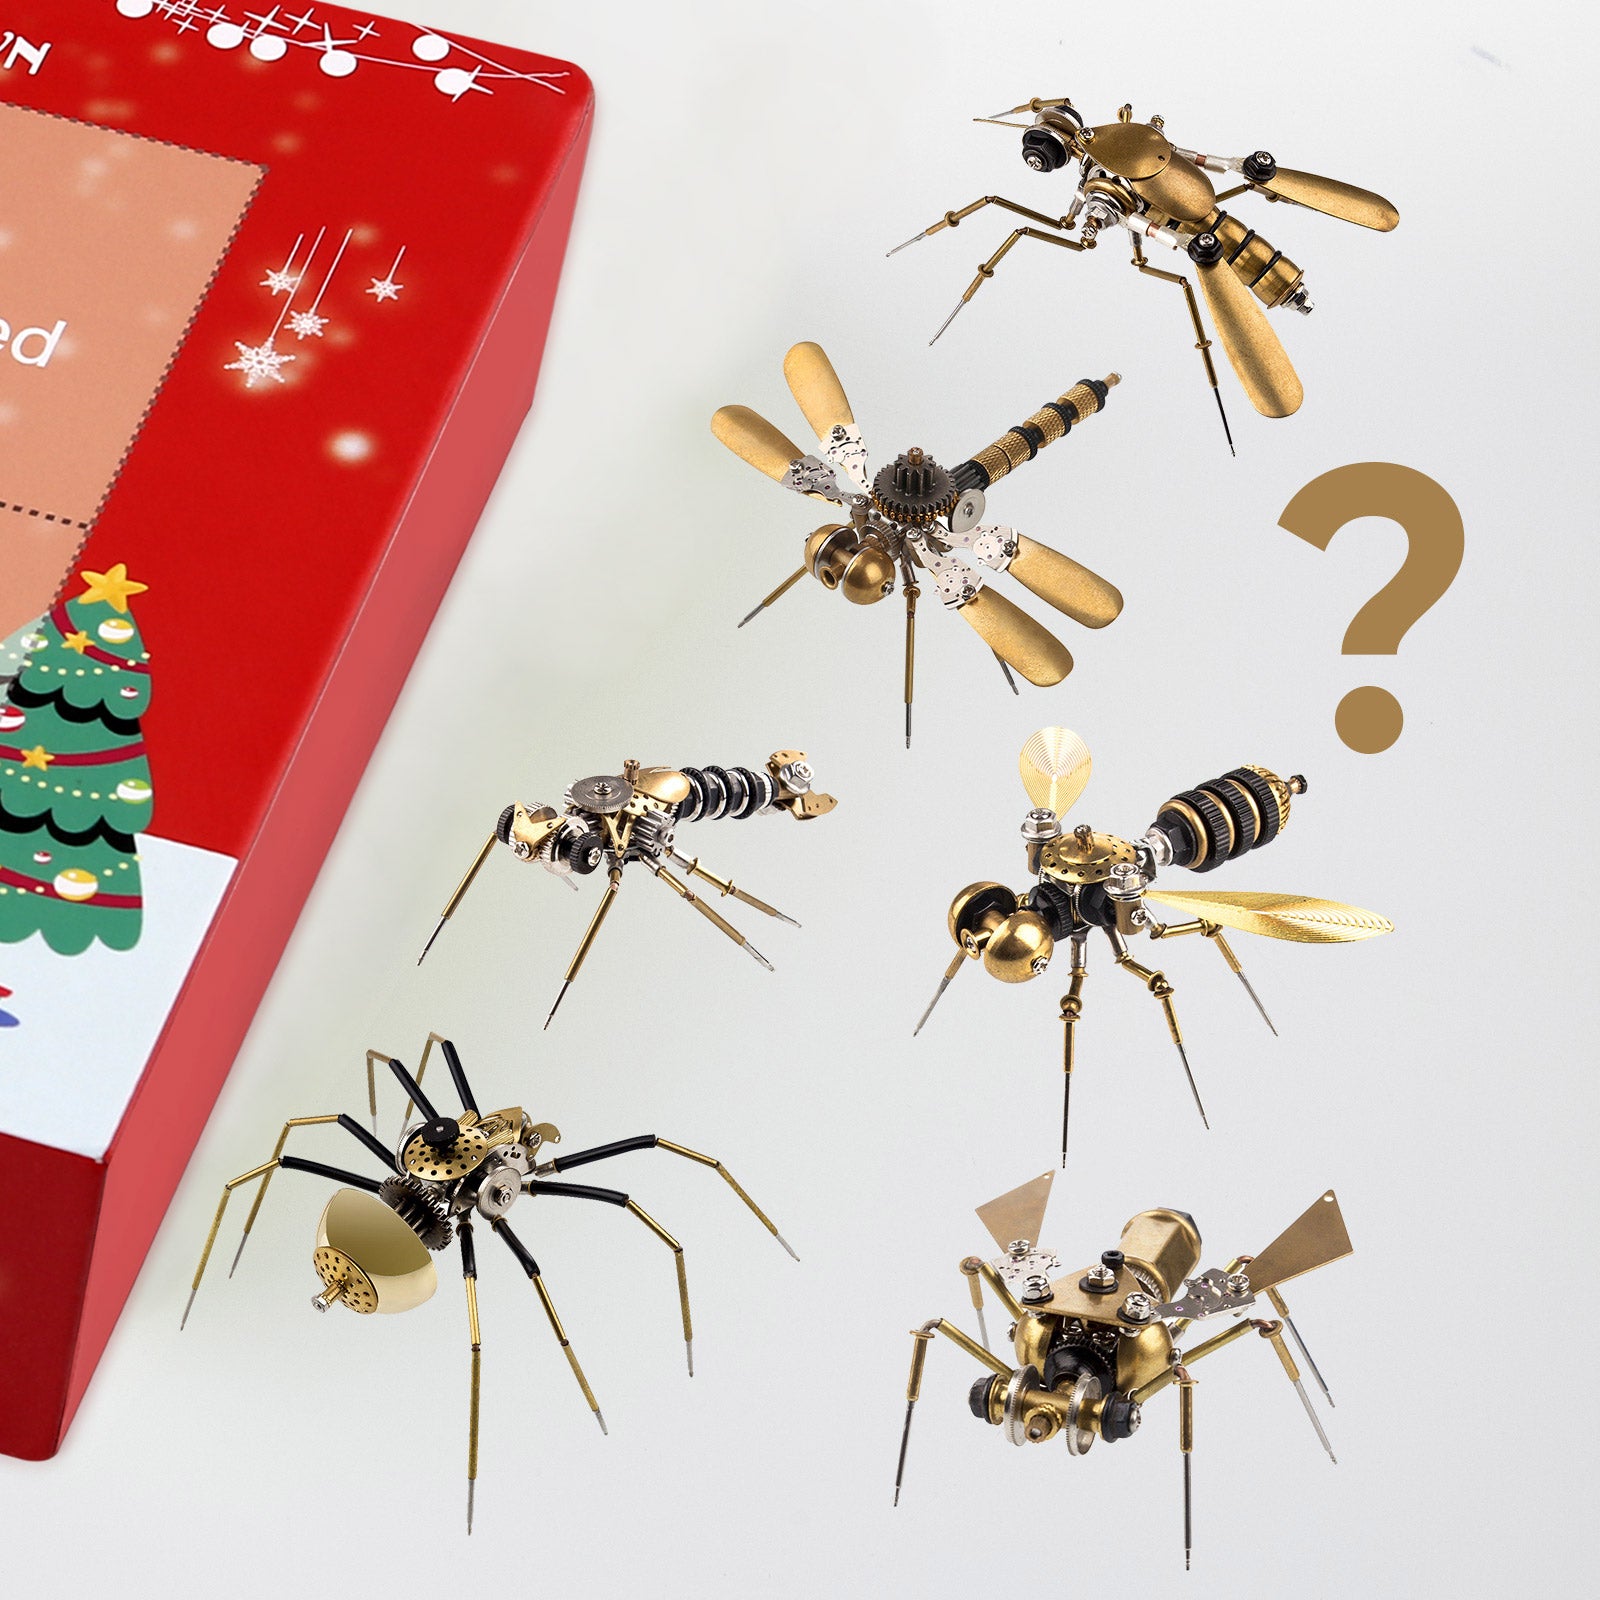 Insect Bugs Advent Calendar DIY Model Kit Blind Box 7 Days to Go Christmas